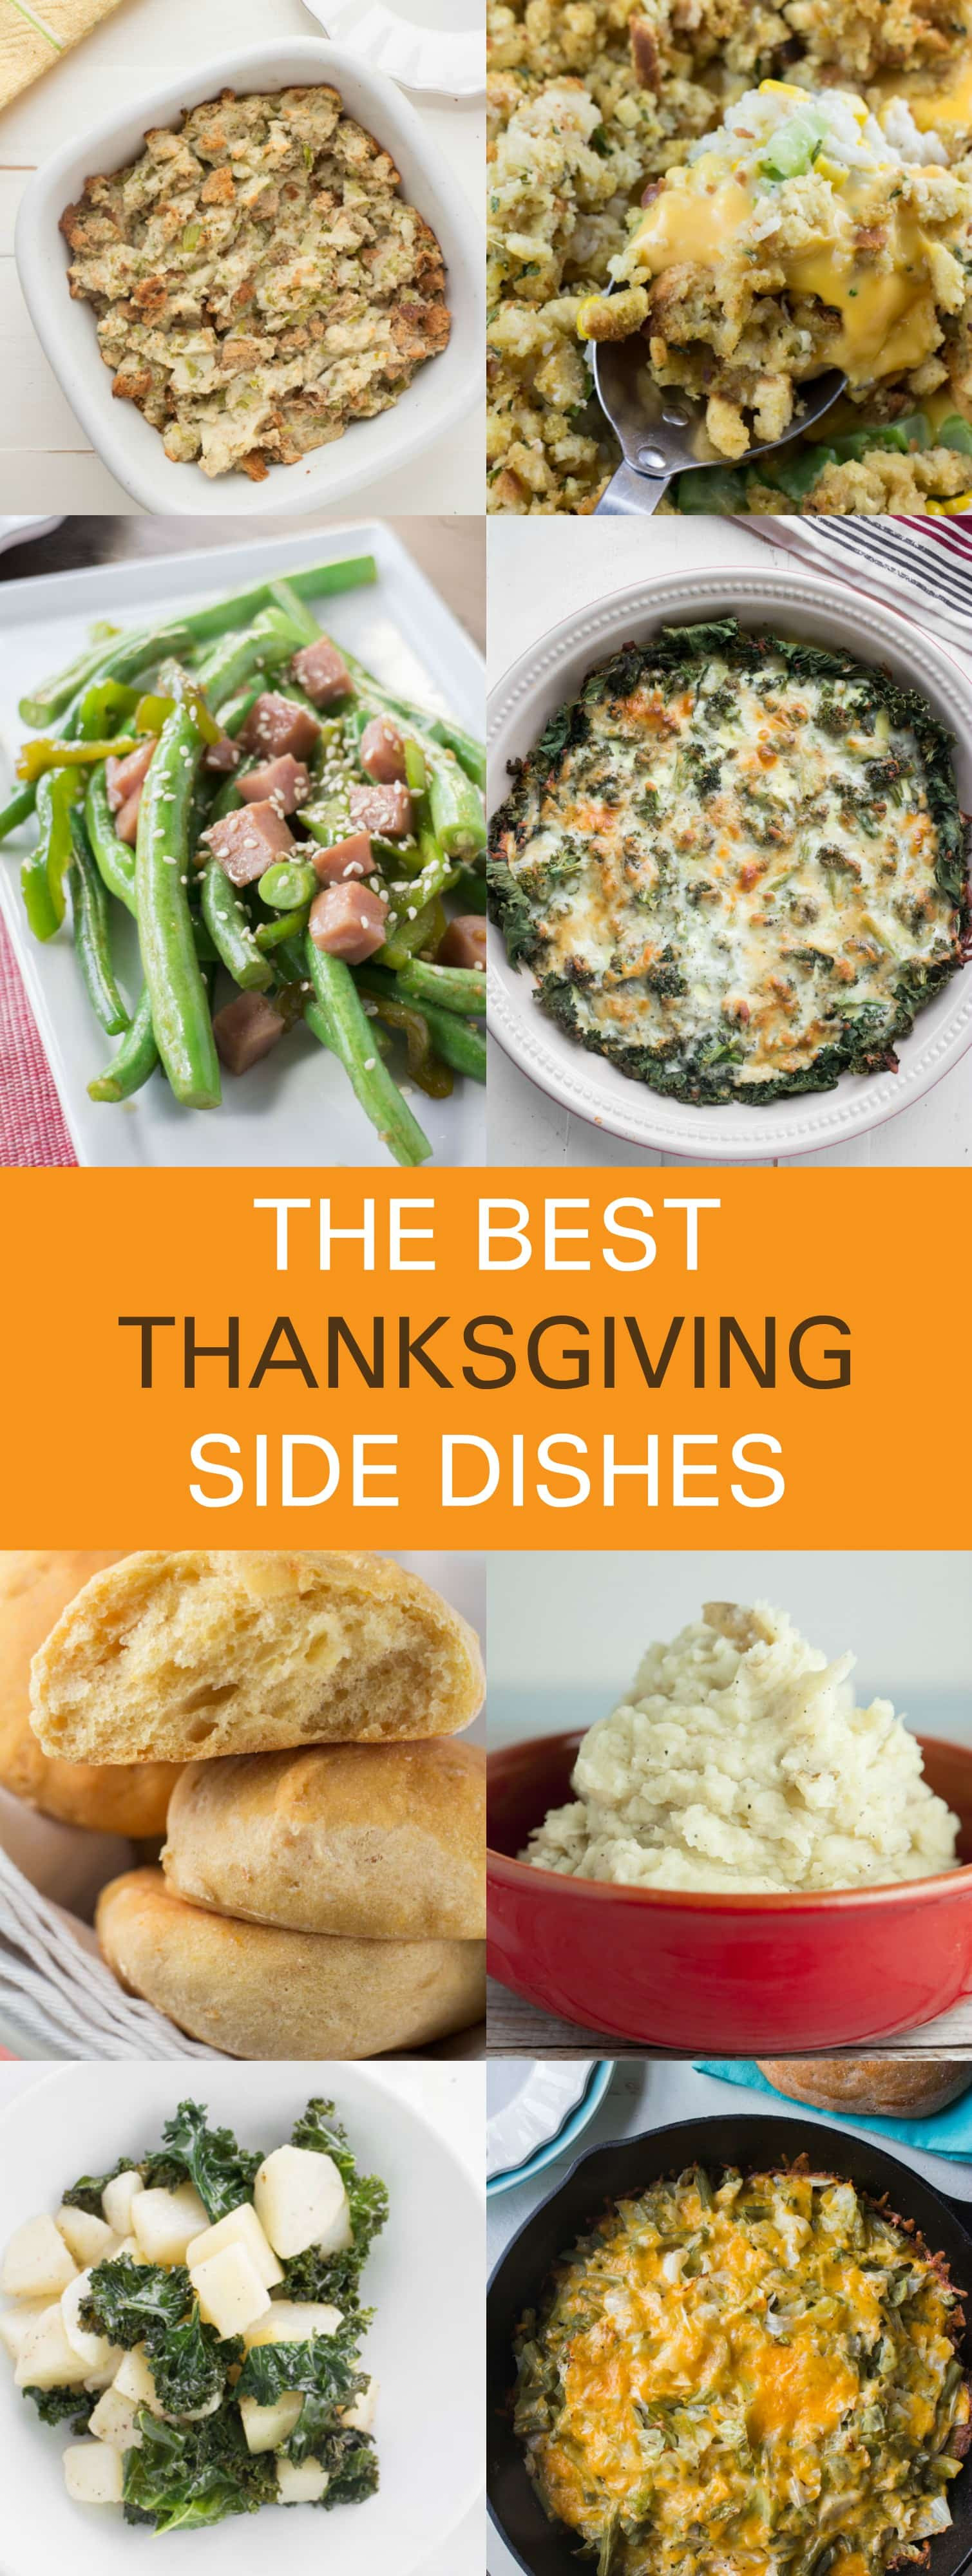 Best Thanksgiving Side Dishes
 My Favorite Thanksgiving Side Dishes Brooklyn Farm Girl